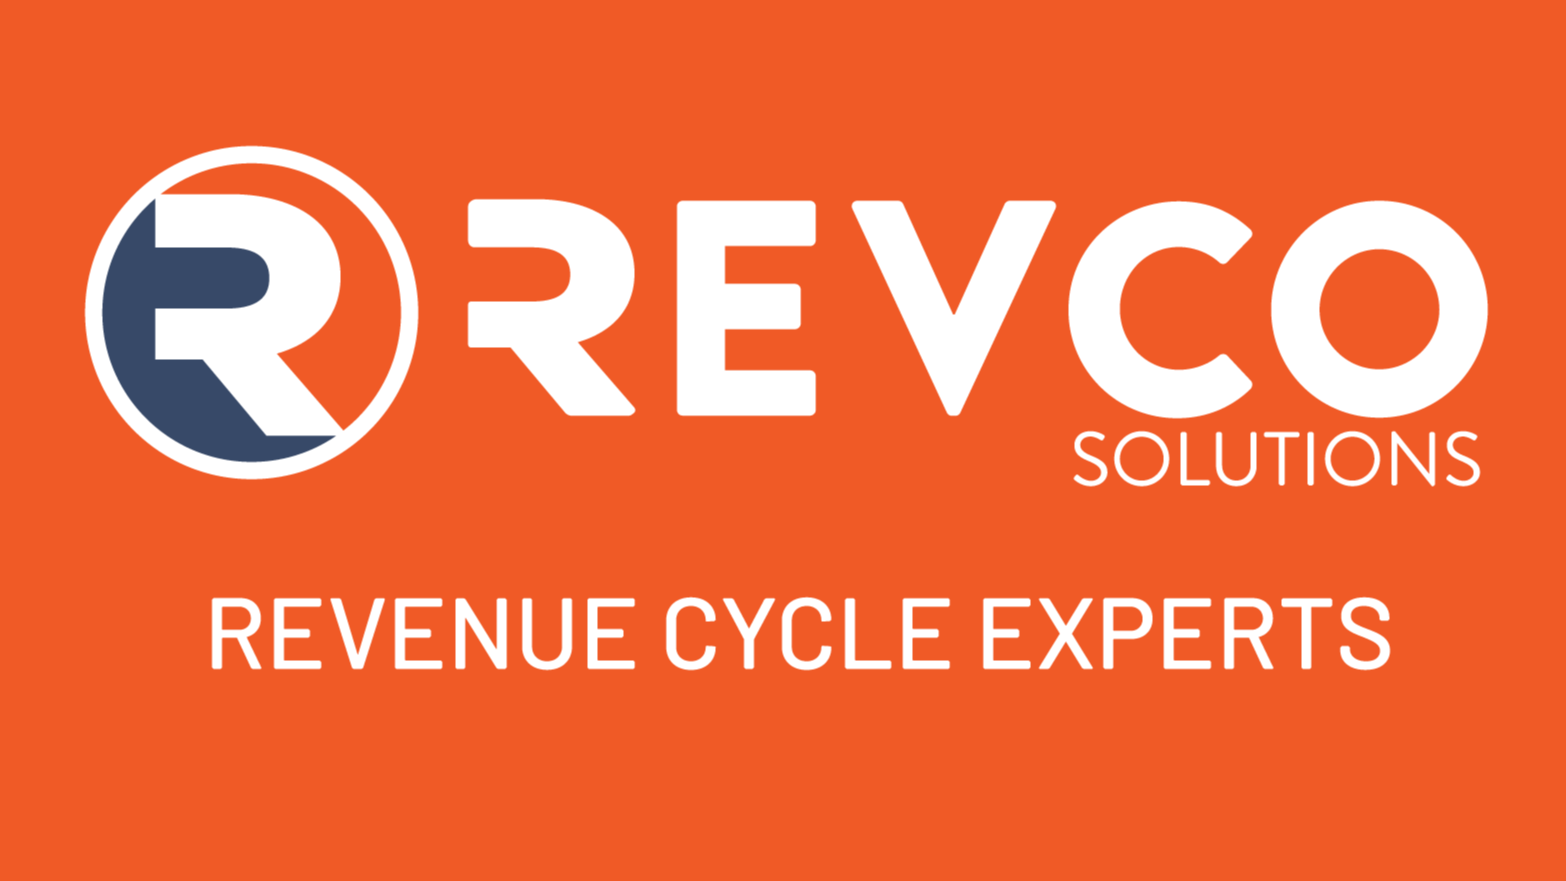 Discover Revco Solutions Blog on Workers' Compensation